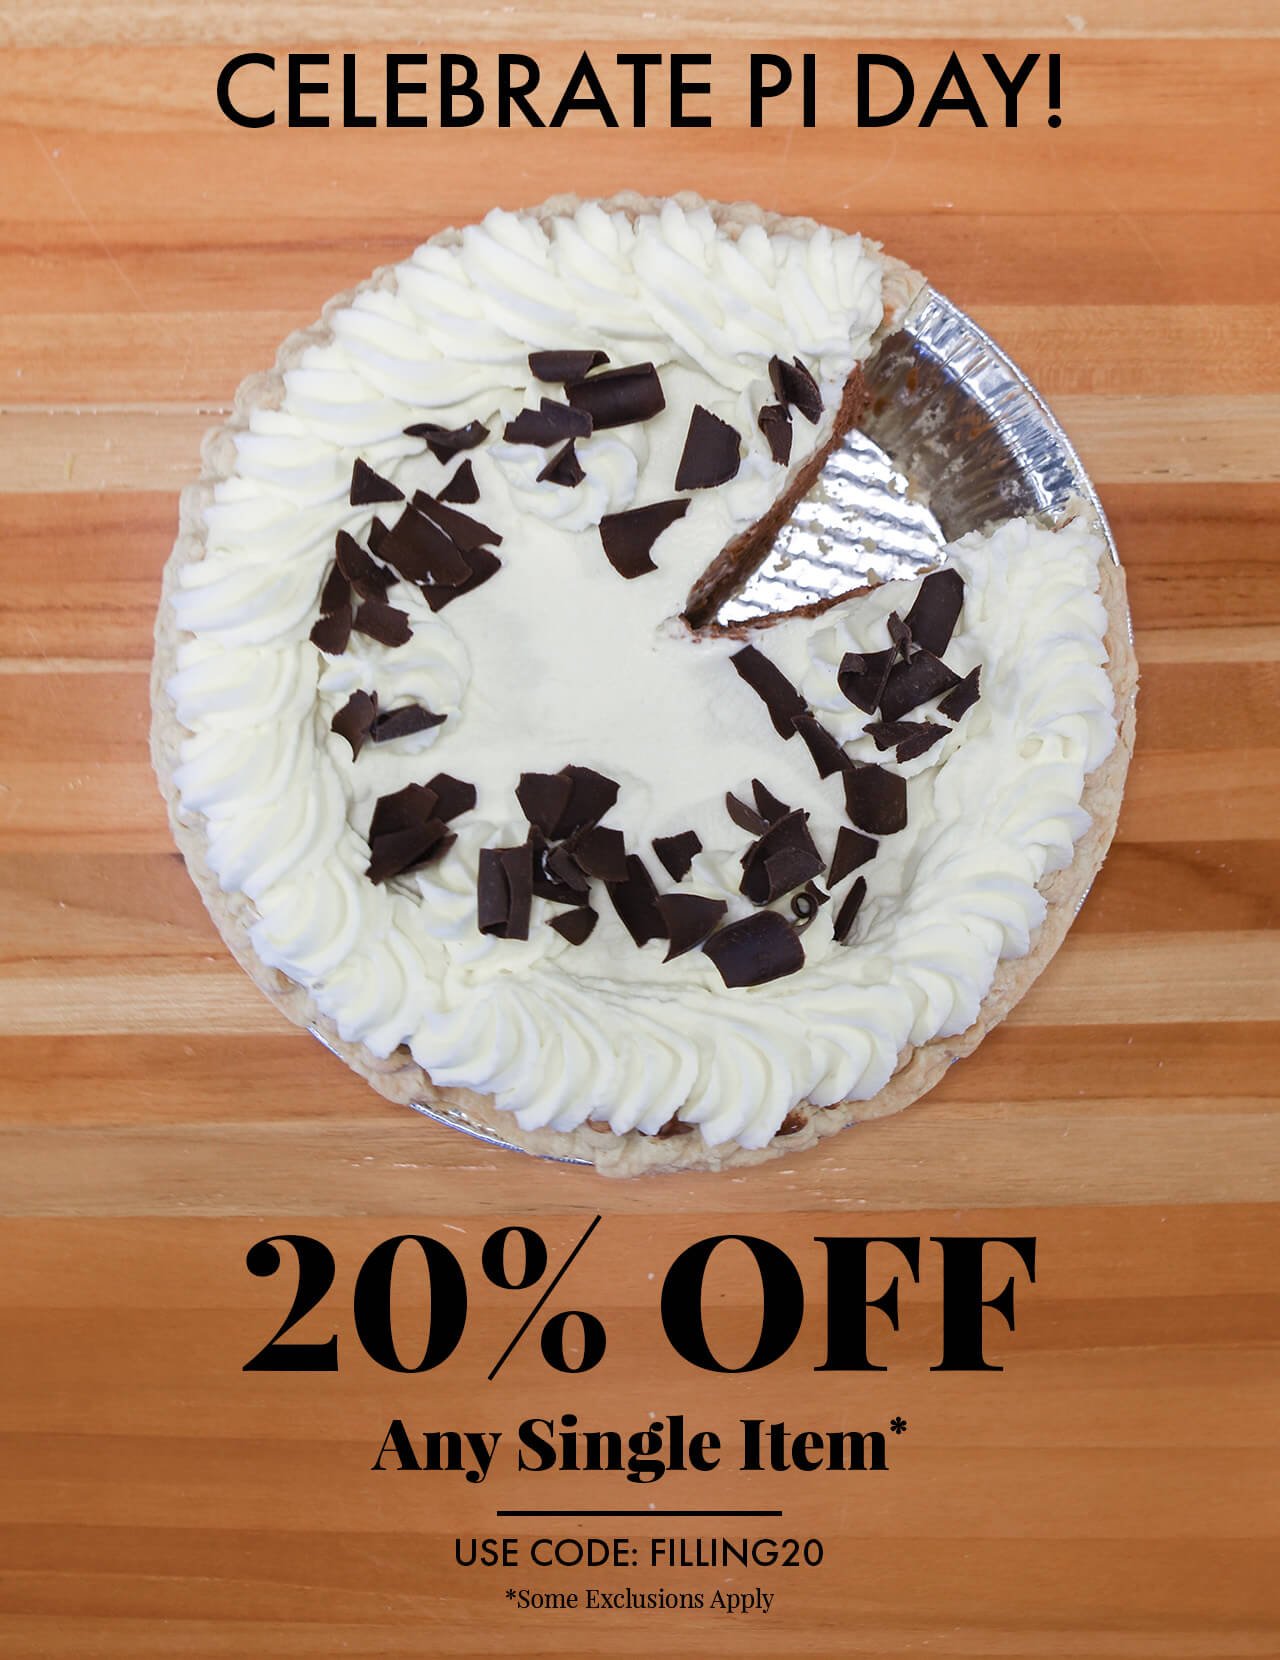 Celebrate Pi Day Slice 20% off a Single Item* Use Code: FILLING20 (* Some exclusions apply)